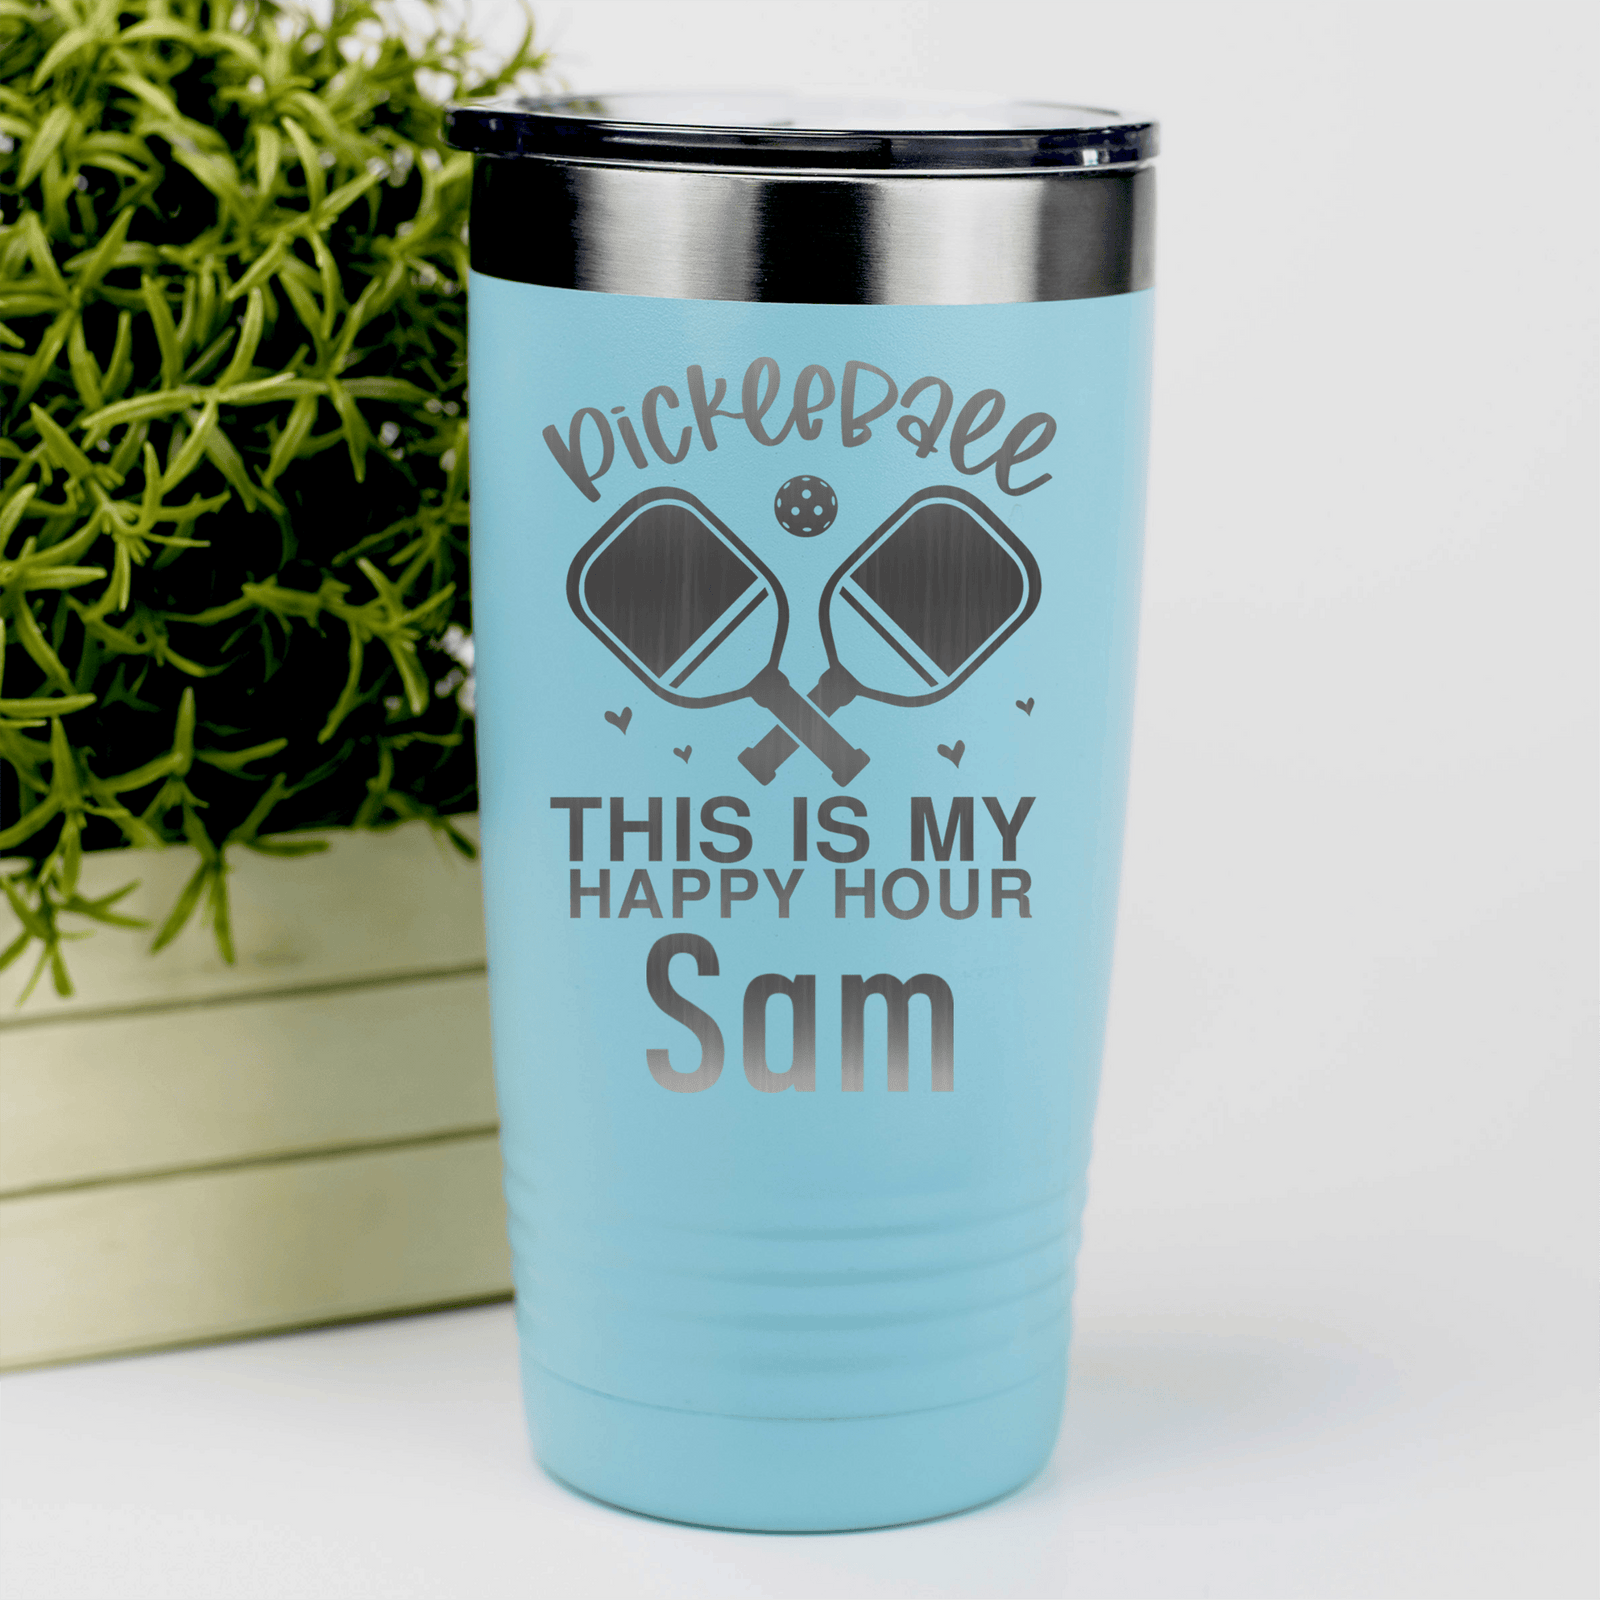 Teal Pickleball Tumbler With Pickleball Happy Hour Design